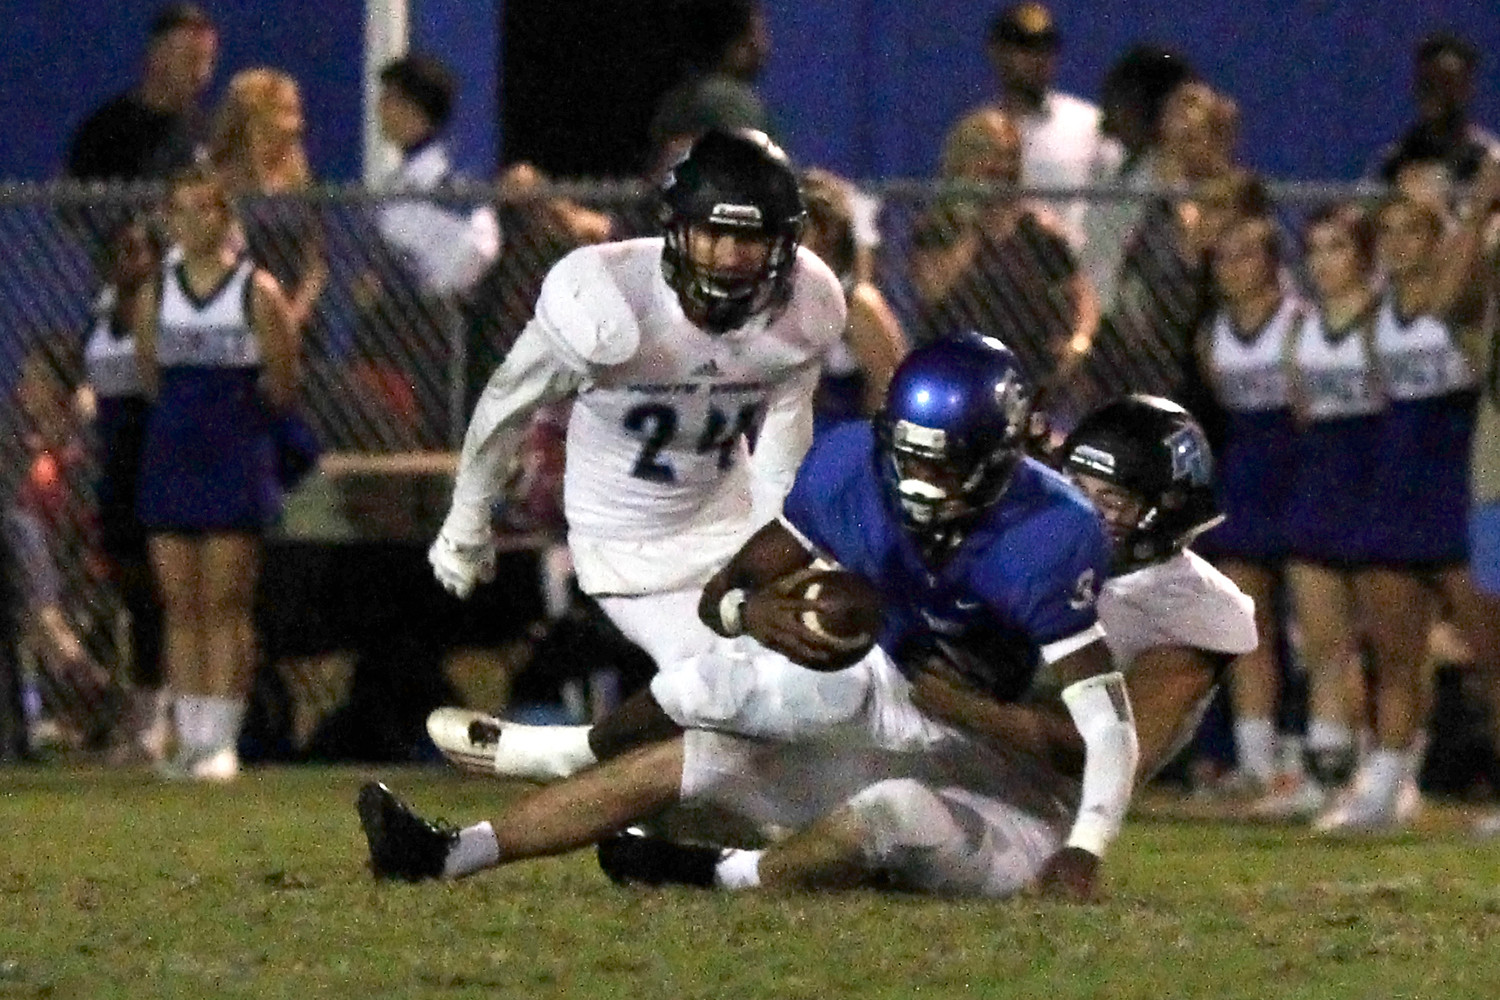 Gibson Pardue makes the tackle for the Sharks.